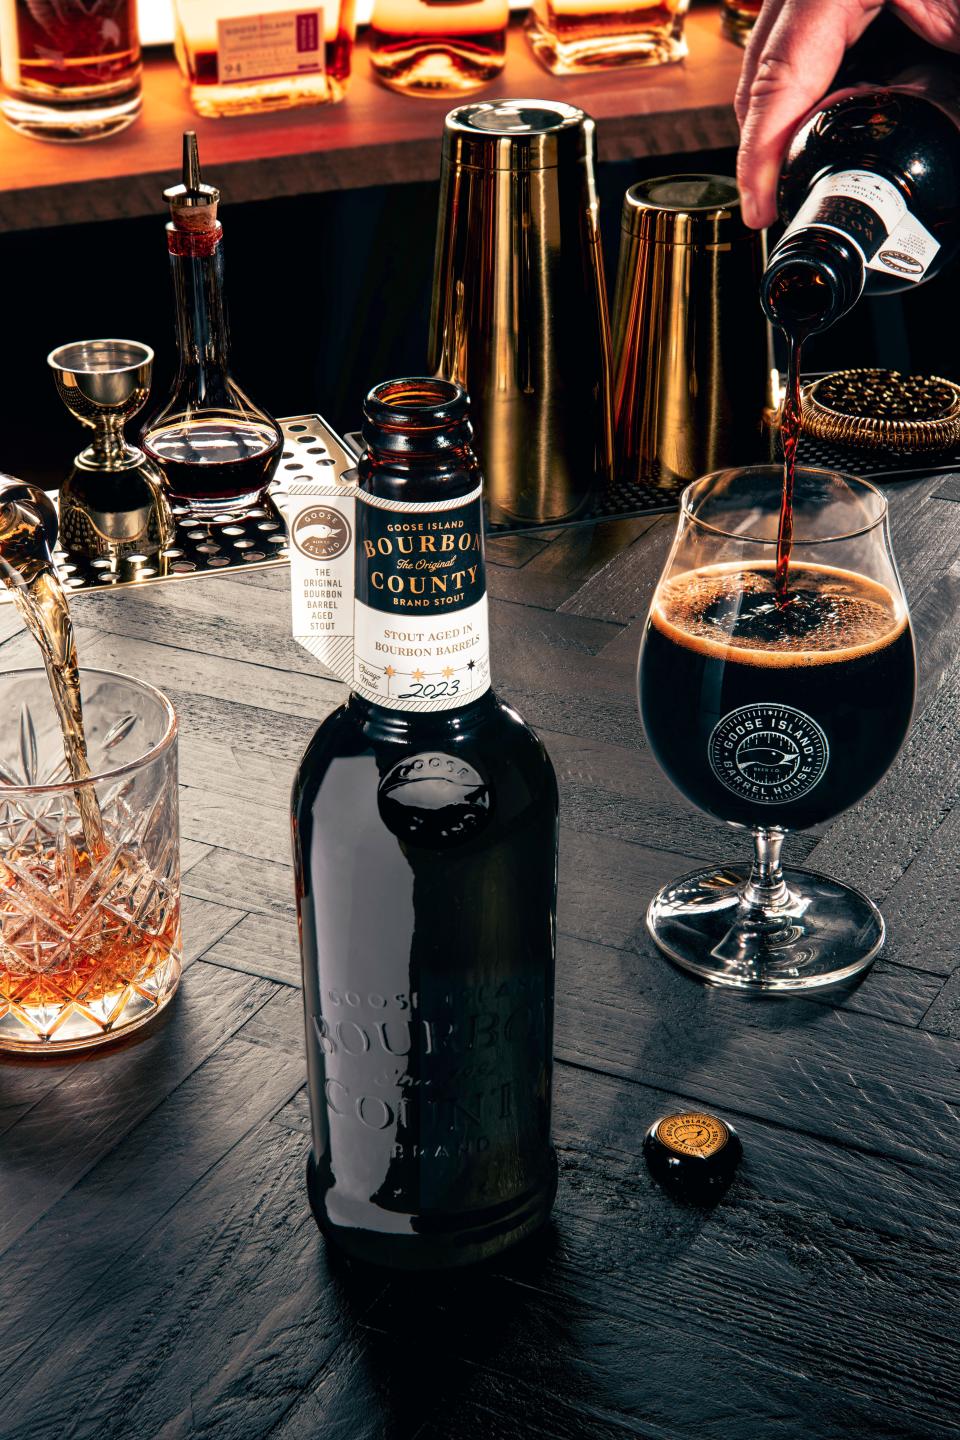 Goose Island Beer Co. releases its Bourbon County Stout Brand beers annually on Black Friday.